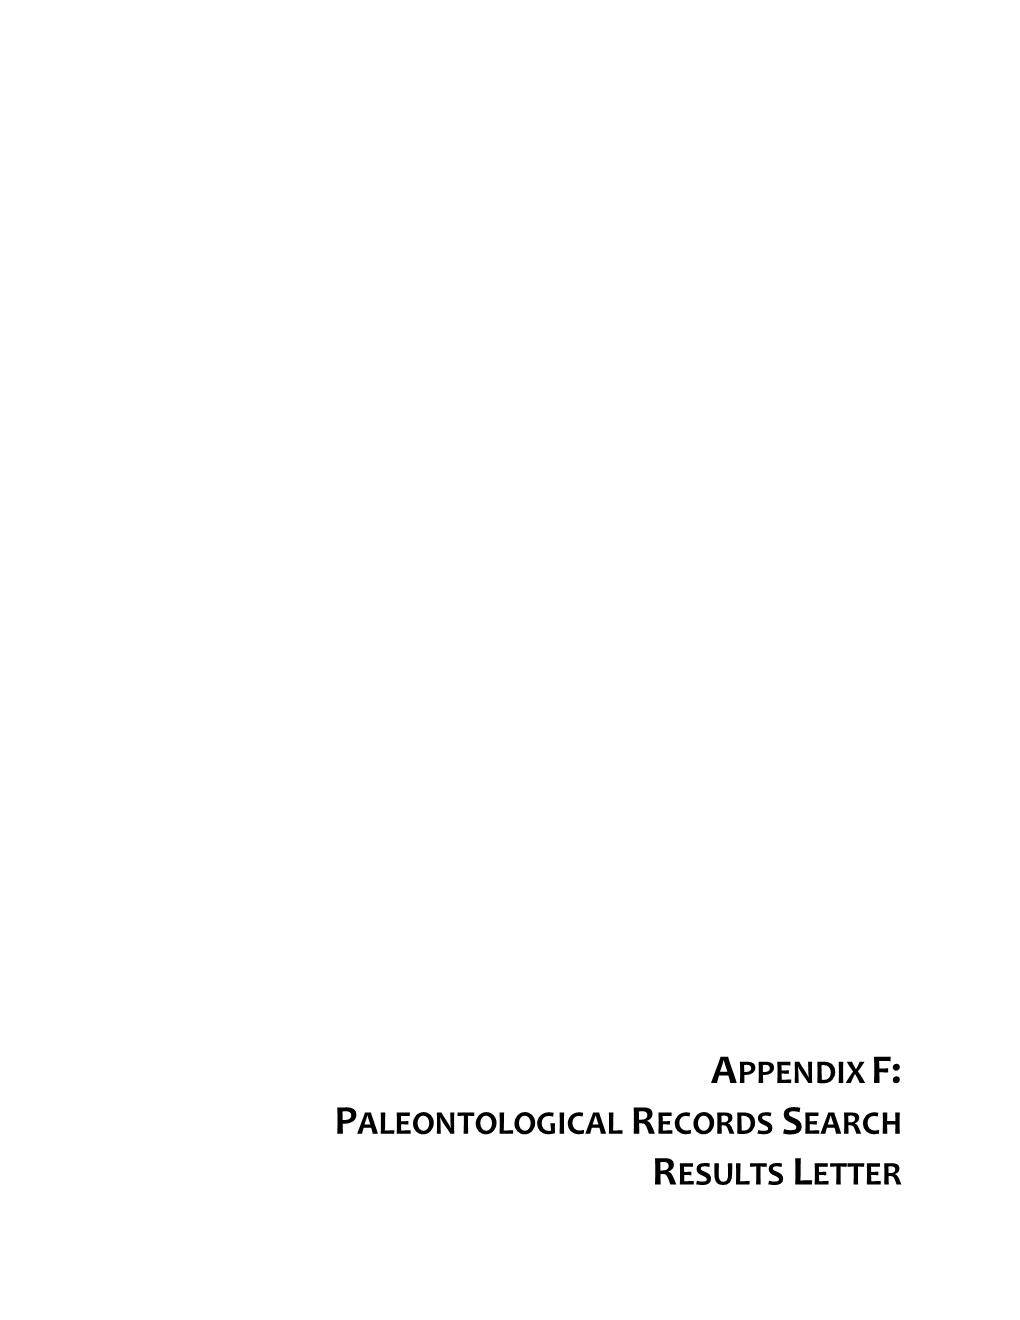 Appendix F: Paleontological Records Search Results Letter